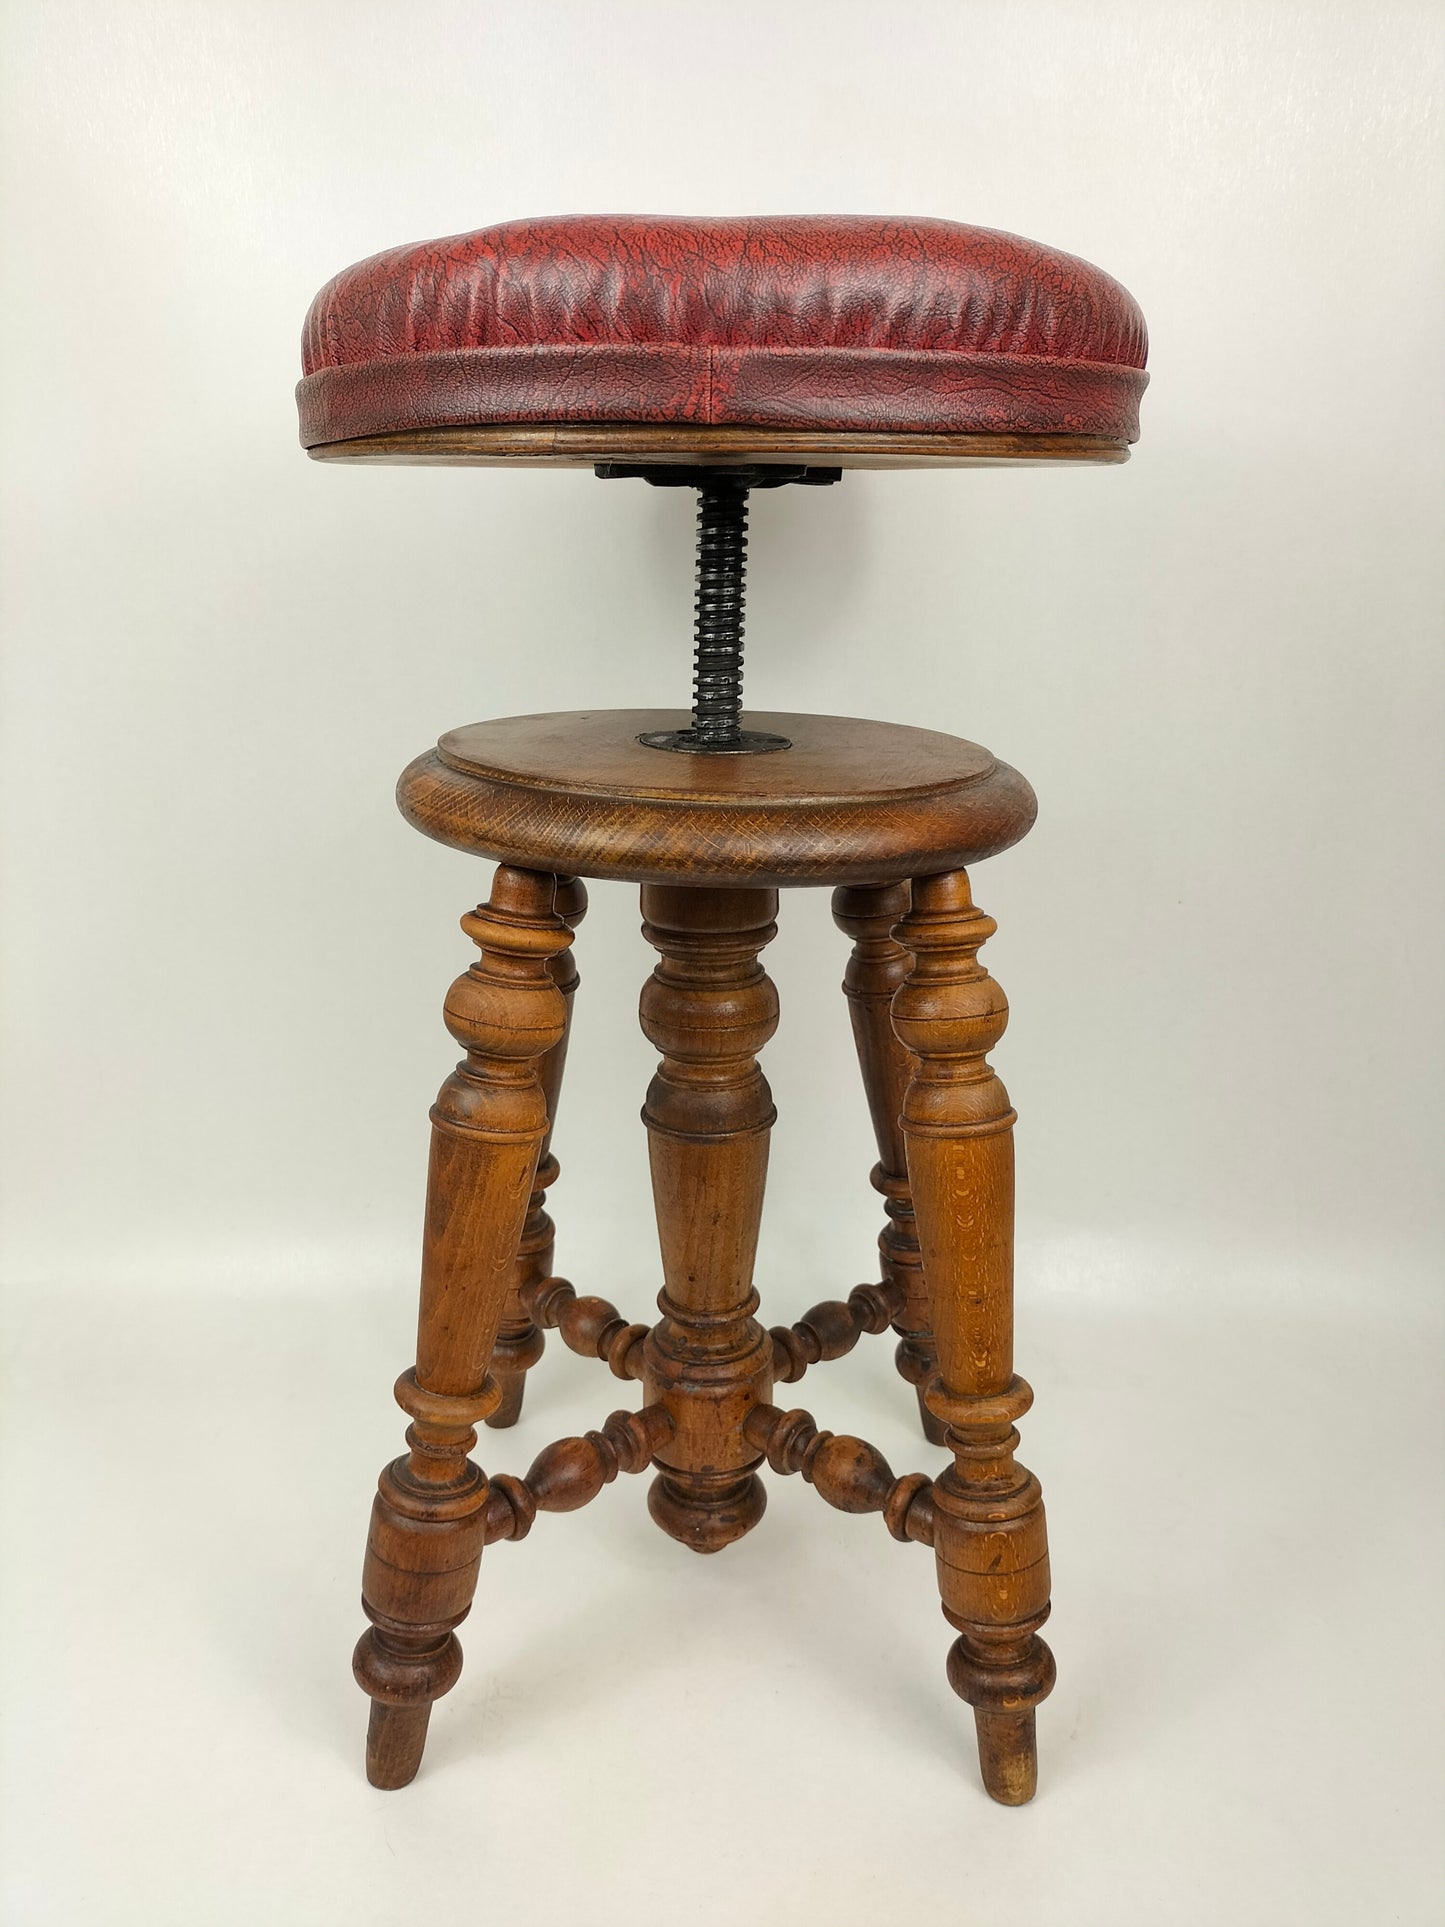 Vintage wooden adjustable piano stool with leather seat // France - 20th century